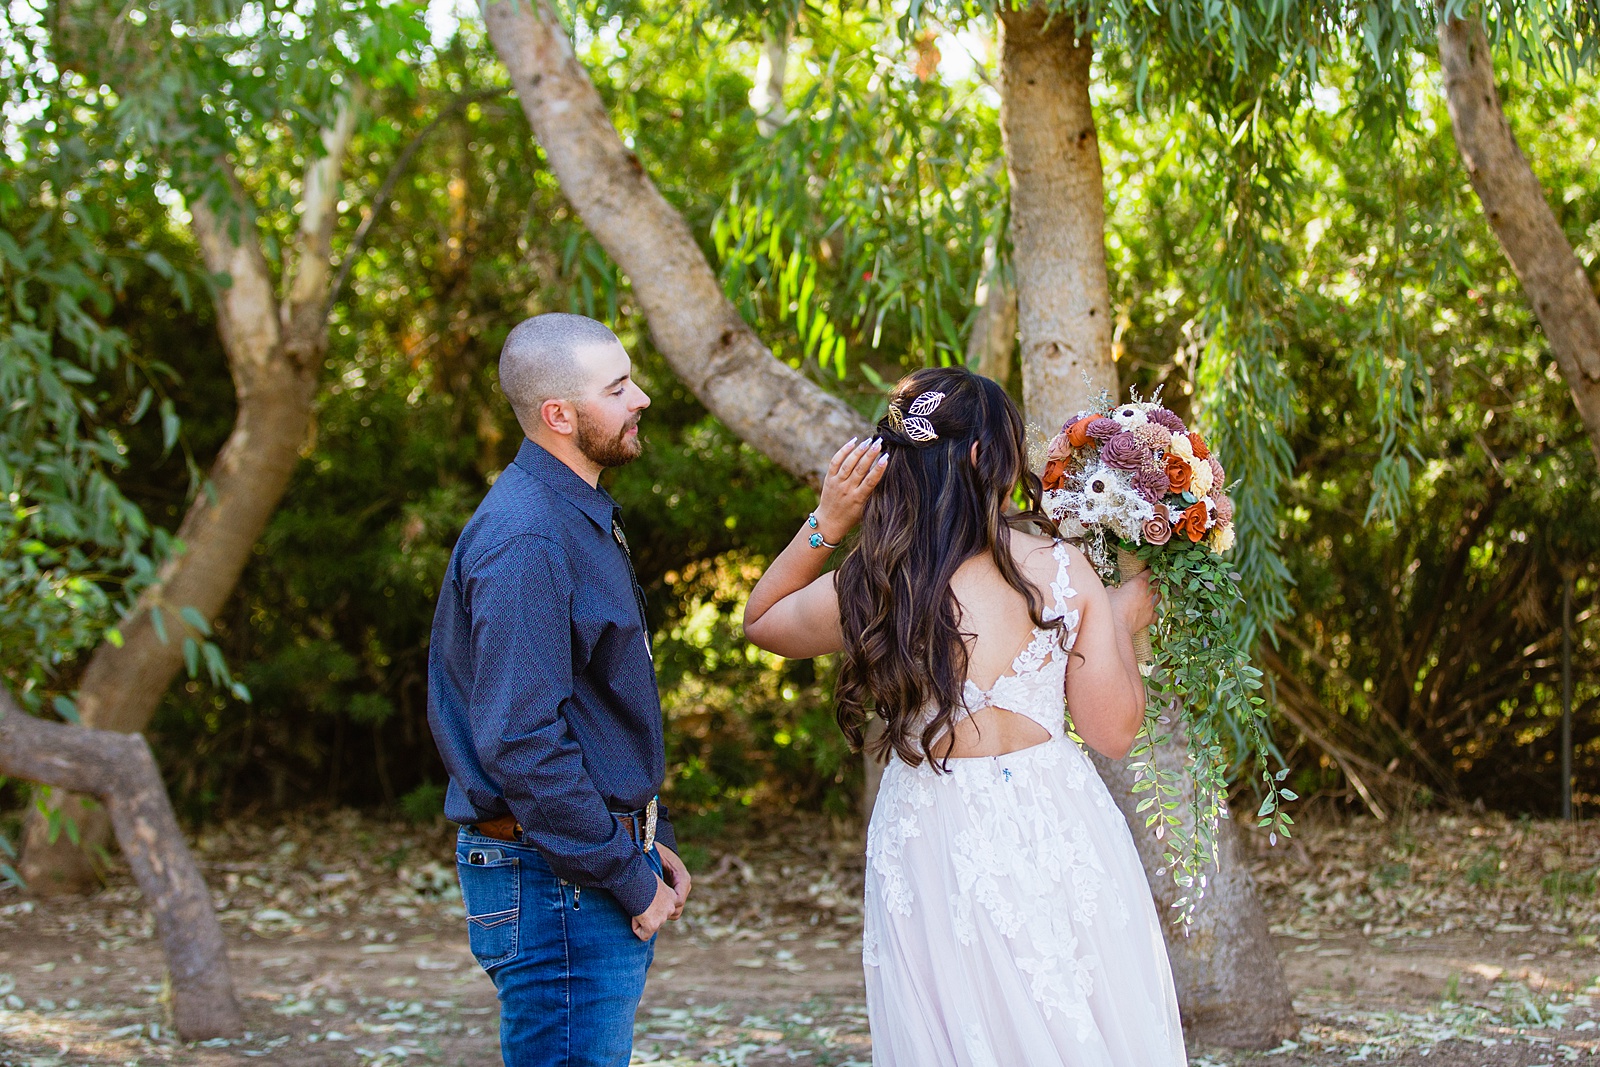 Bride & Groom's first look at intimate backyard wedding by Phoenix wedding photographer Juniper and Co Photography.